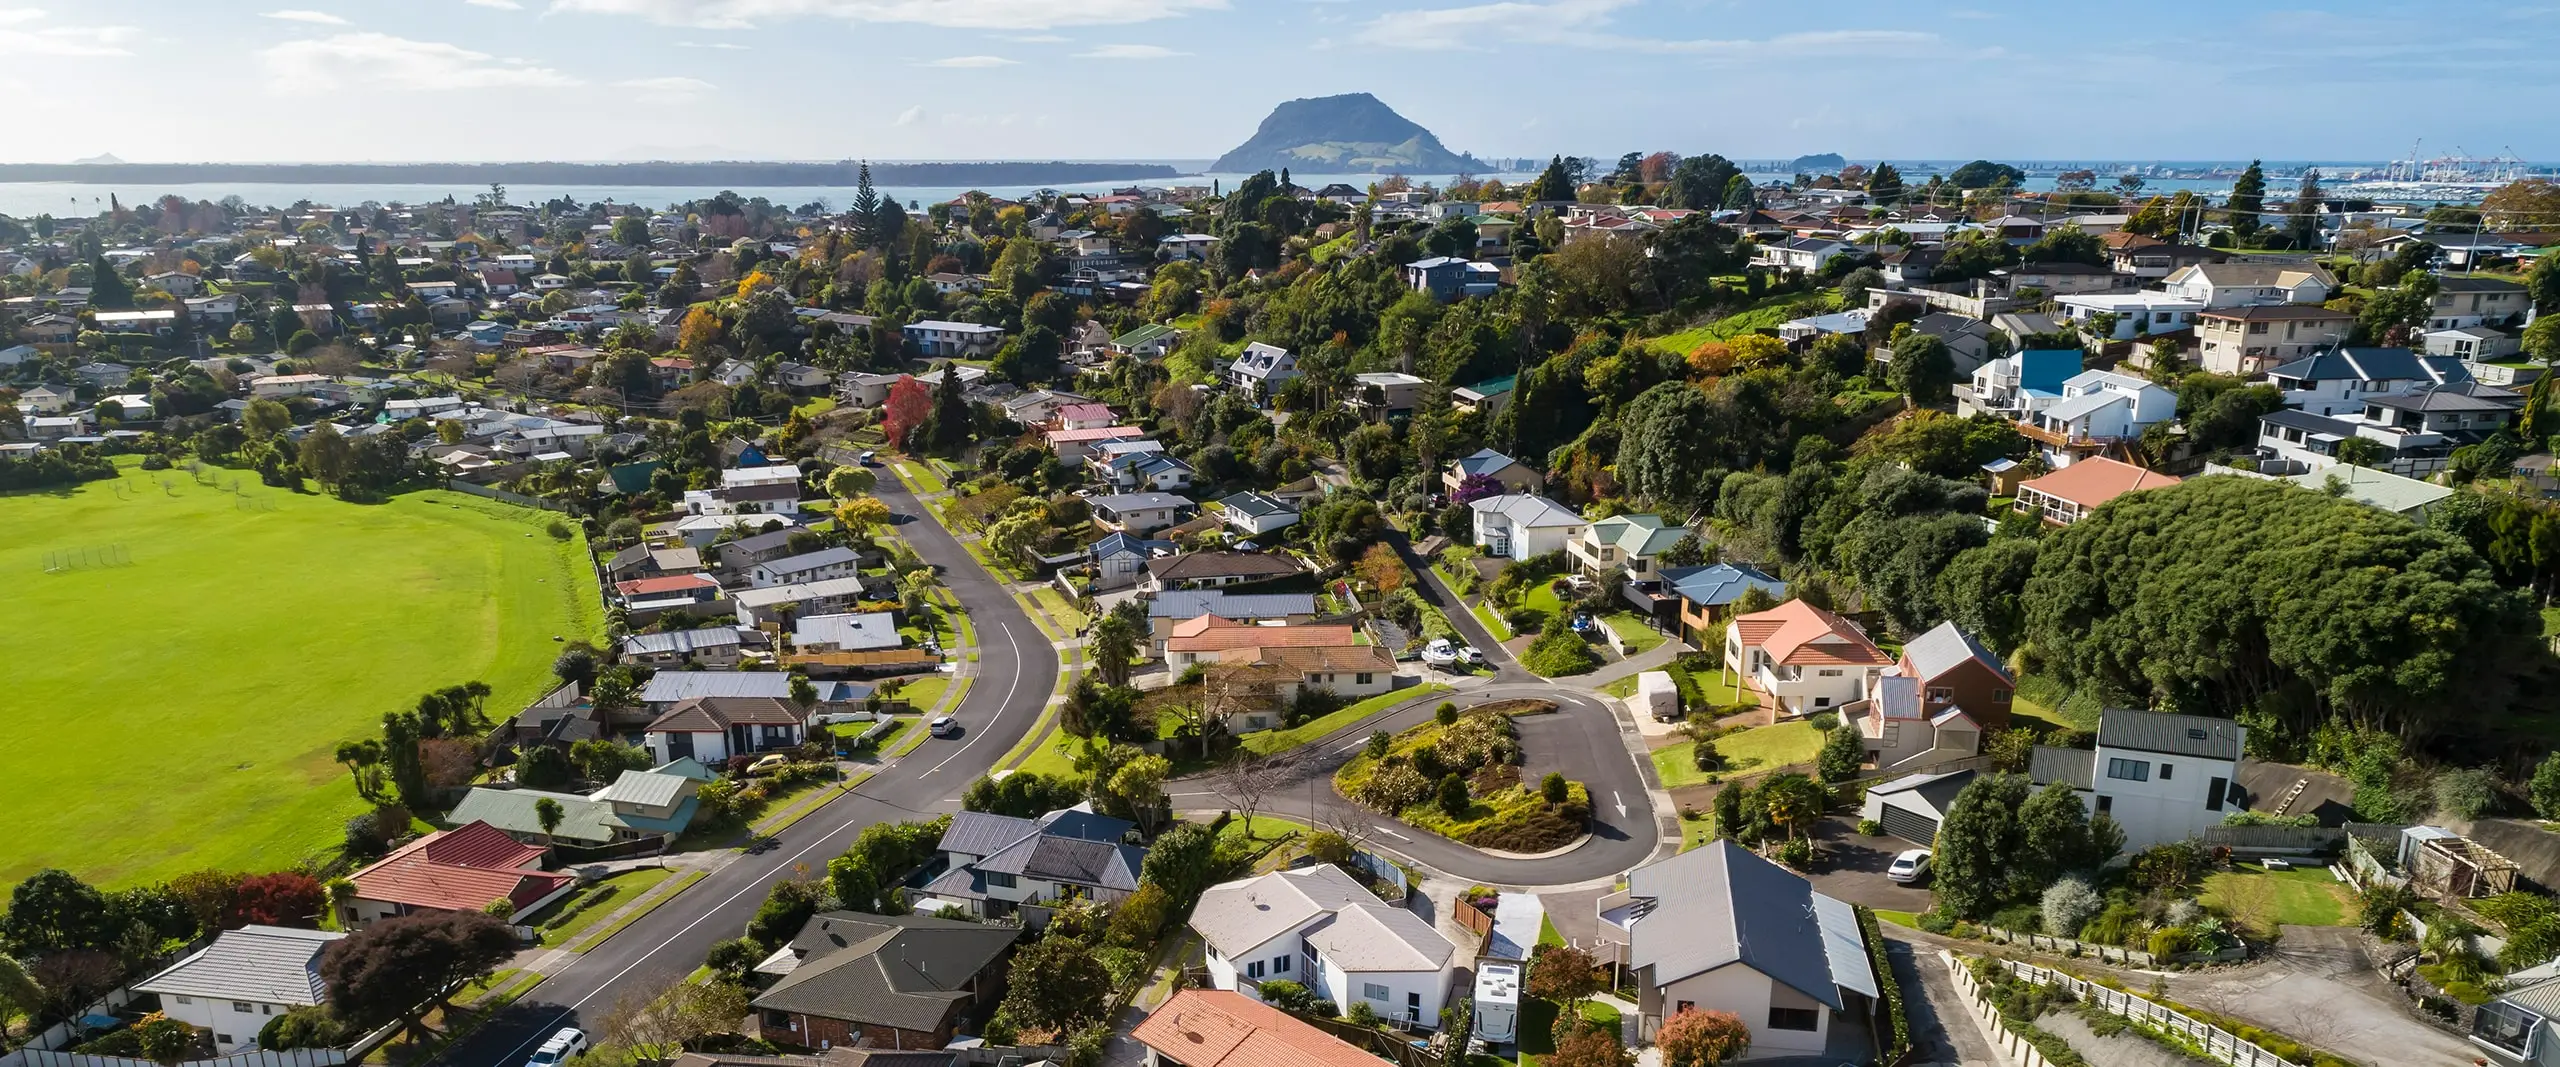 Solving the home insurance problem in Aotearoa New Zealand